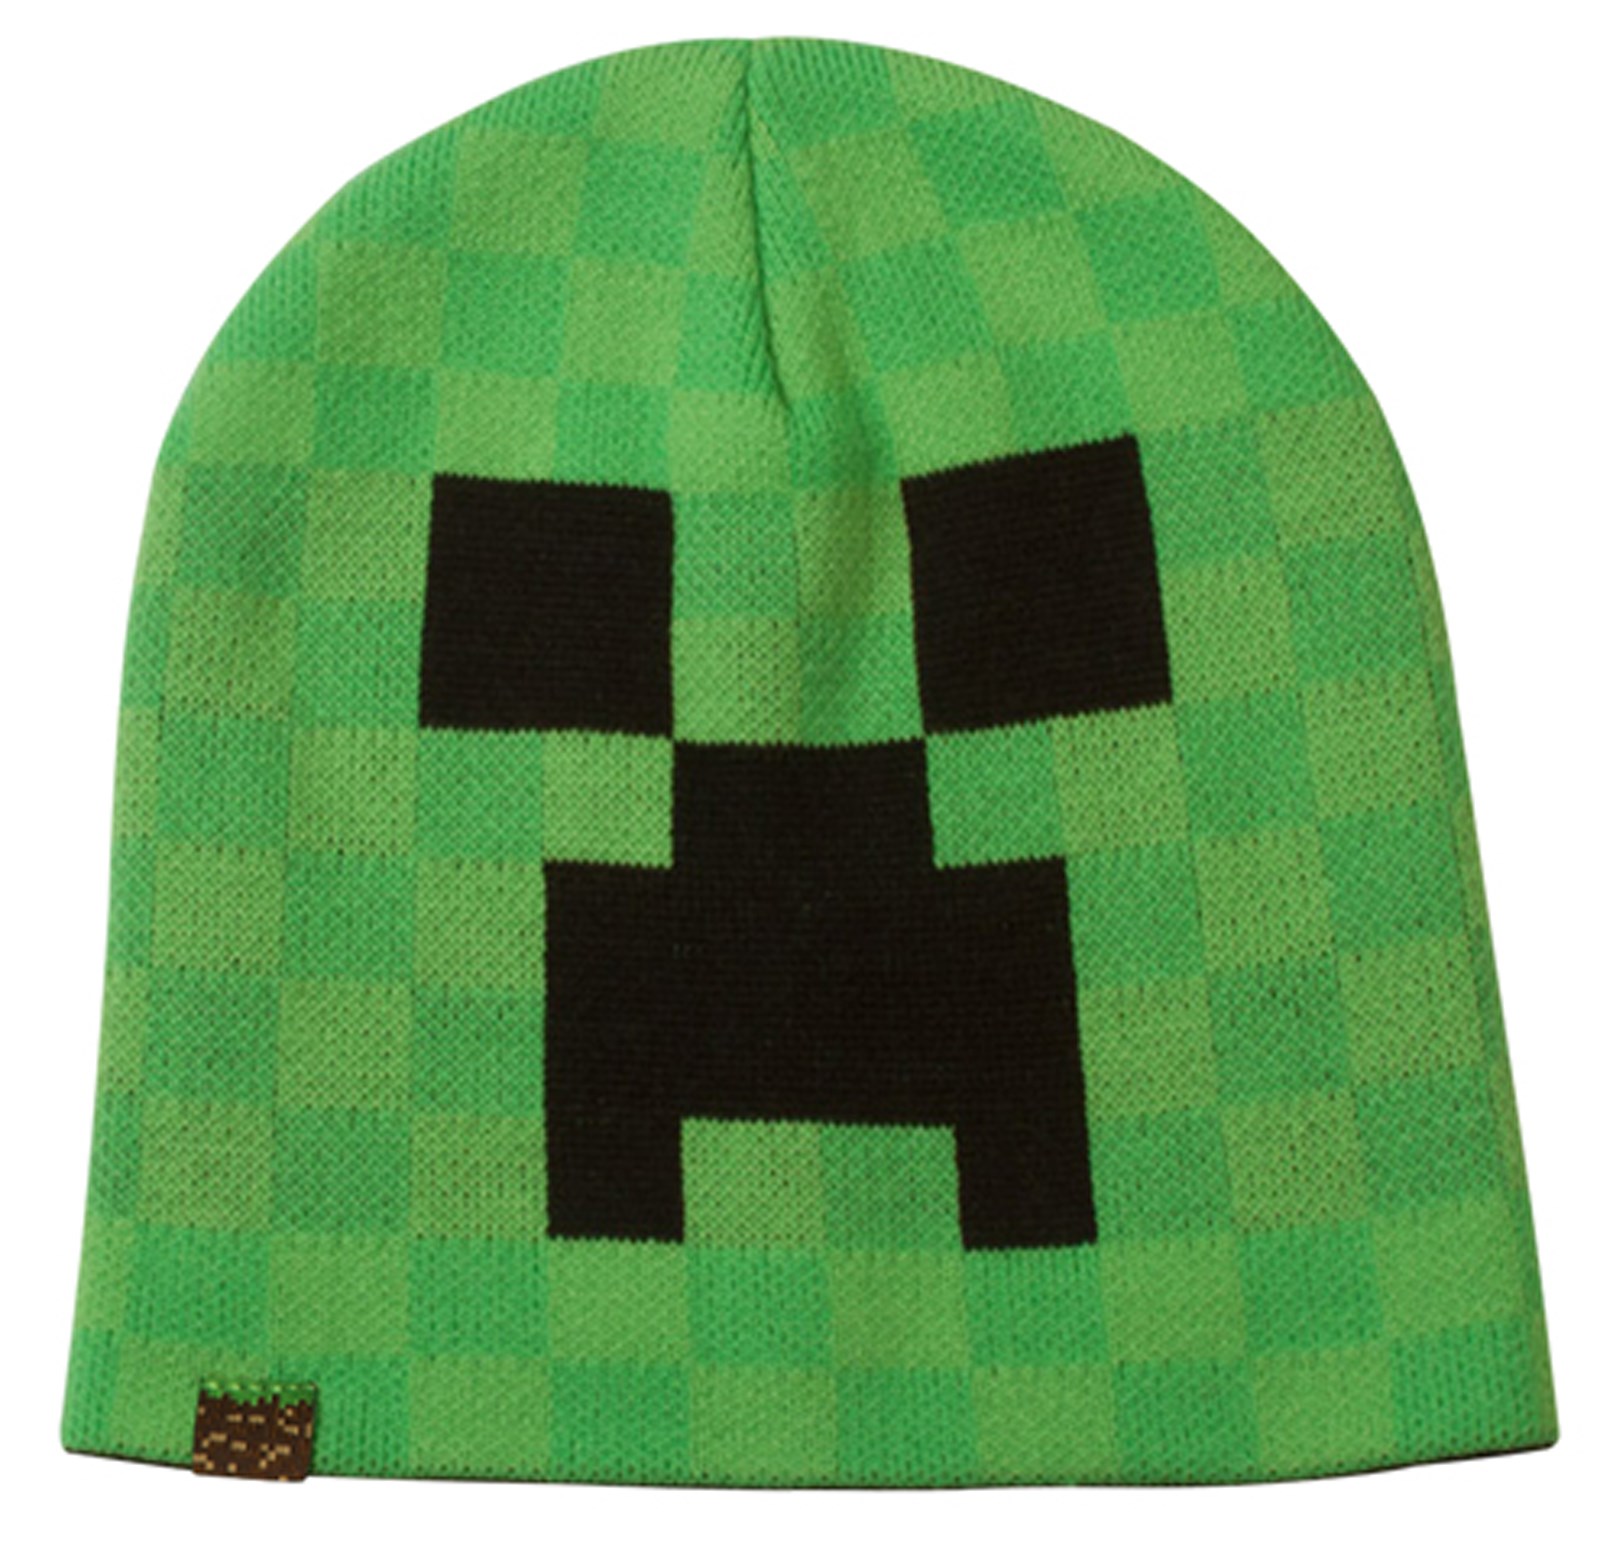 Minecraft Creeper Face Beanie Adult Hat